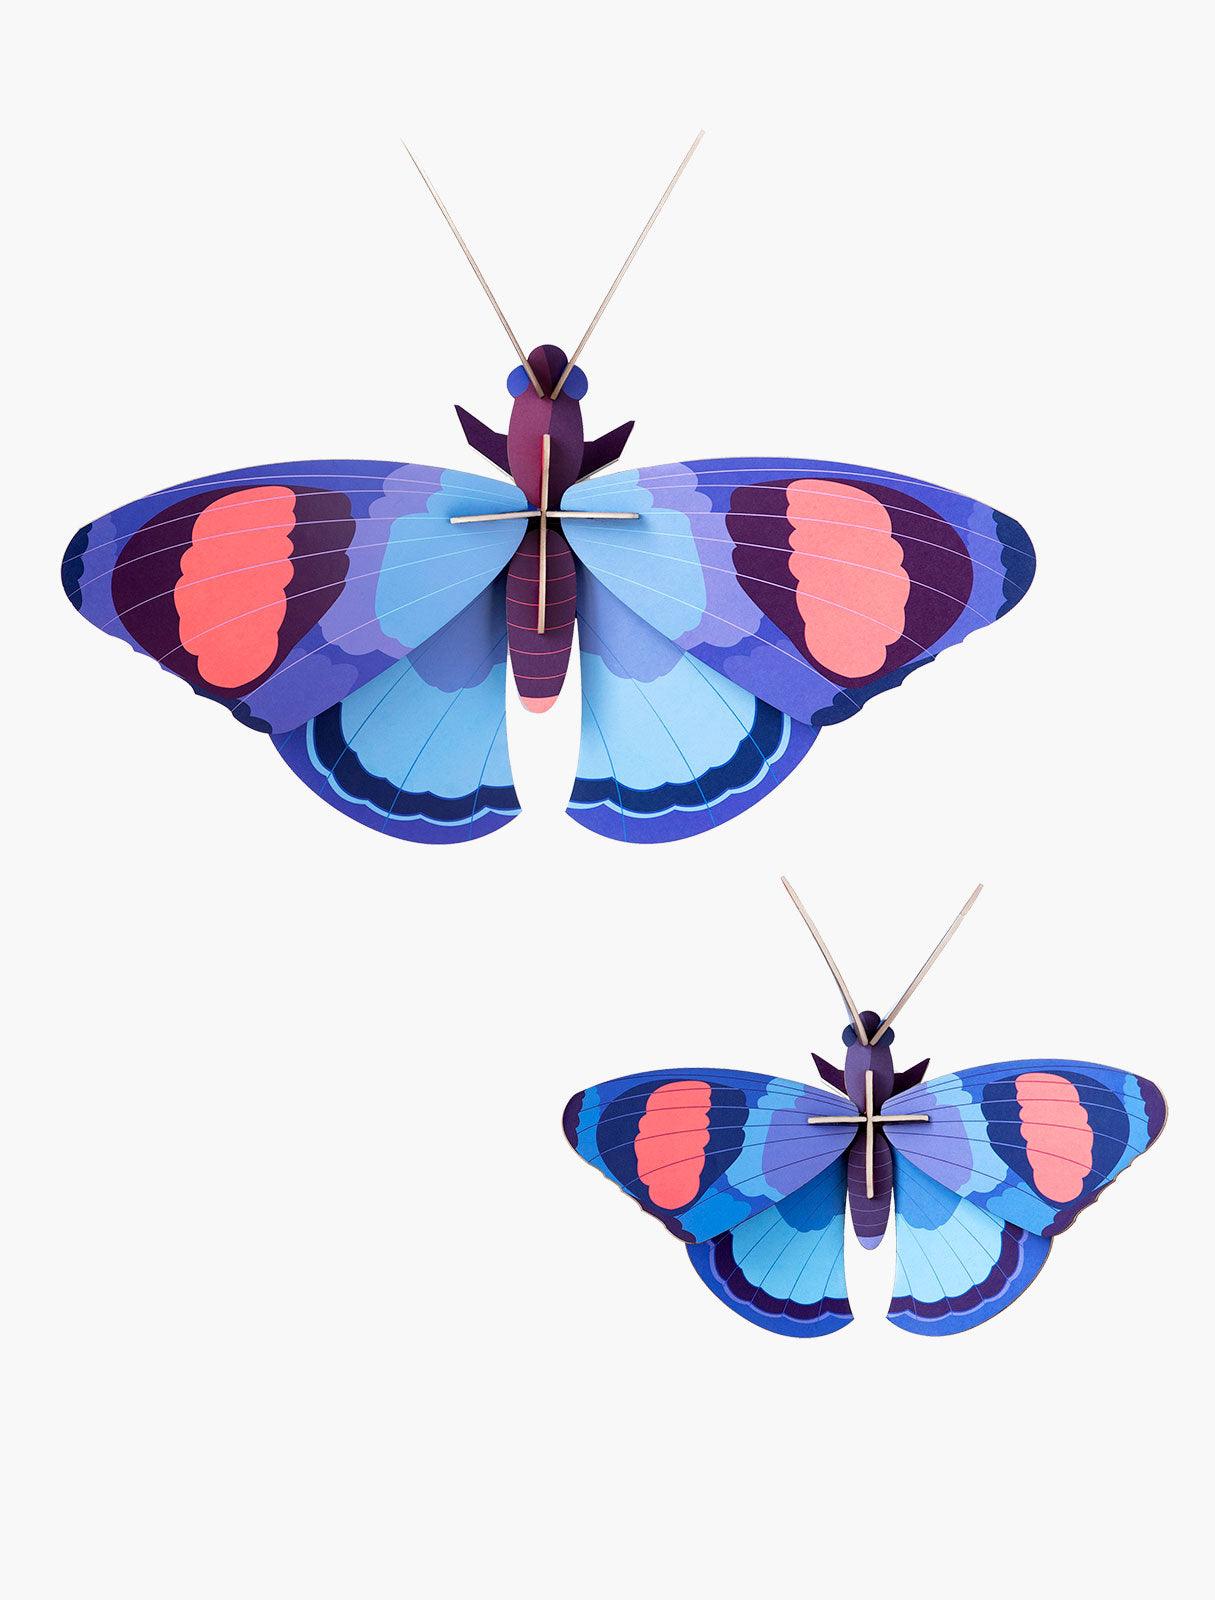 Deluxe Peacock Butterfly (Large and Medium) - Gigglewick Gallery